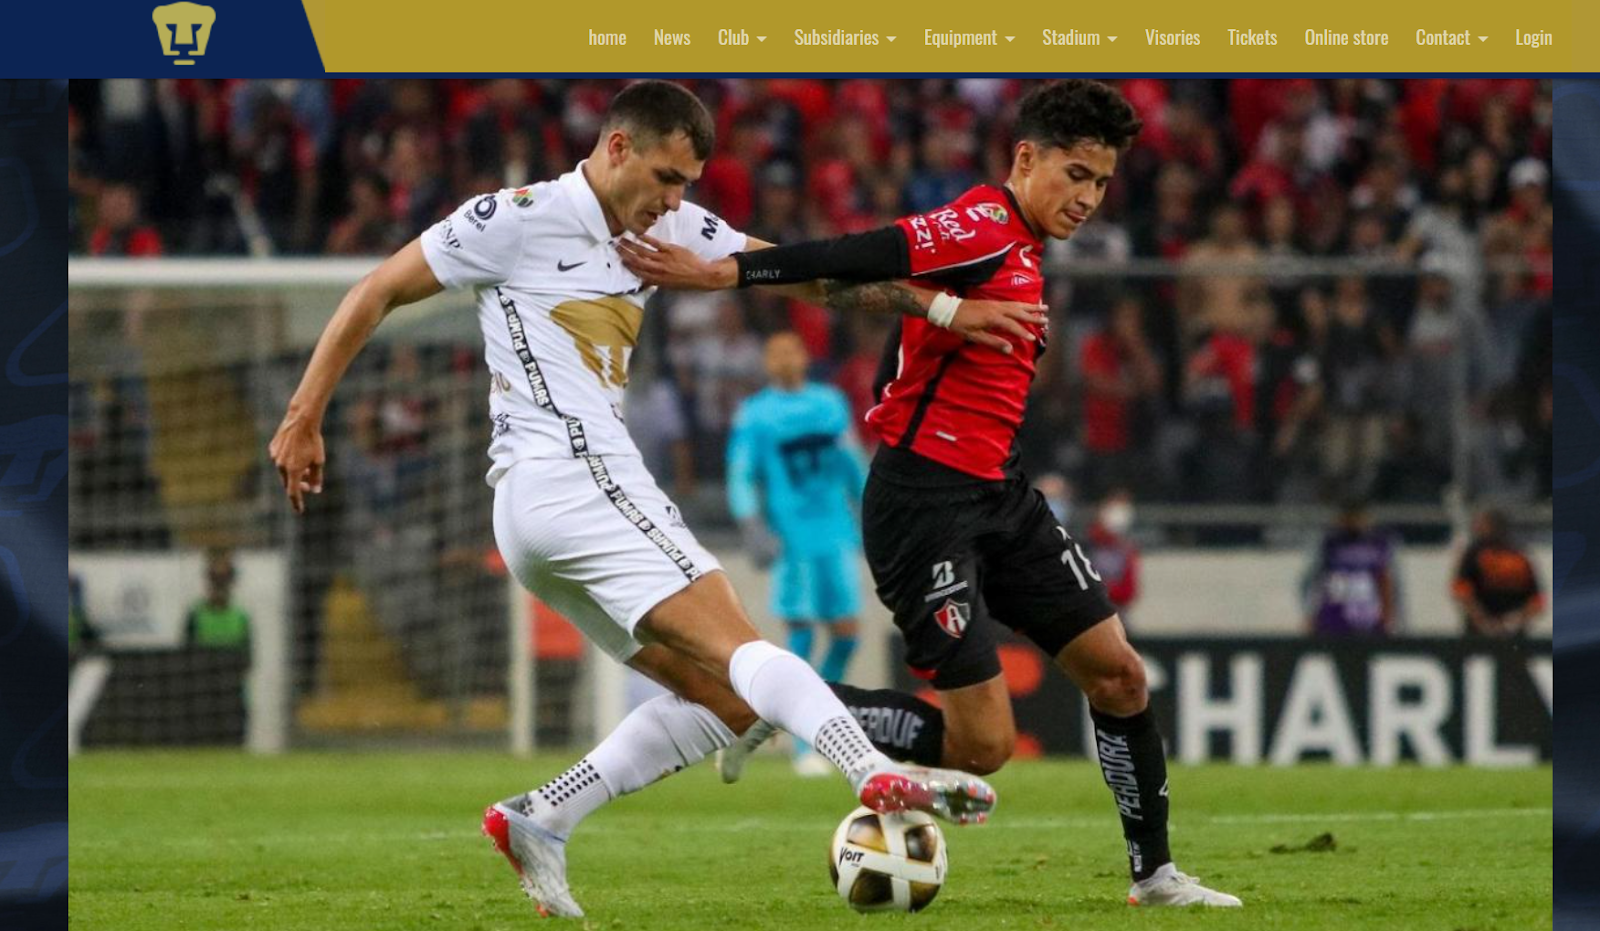 PUMAS UNAM Is One Of The Best Soccer Teams In Mexico